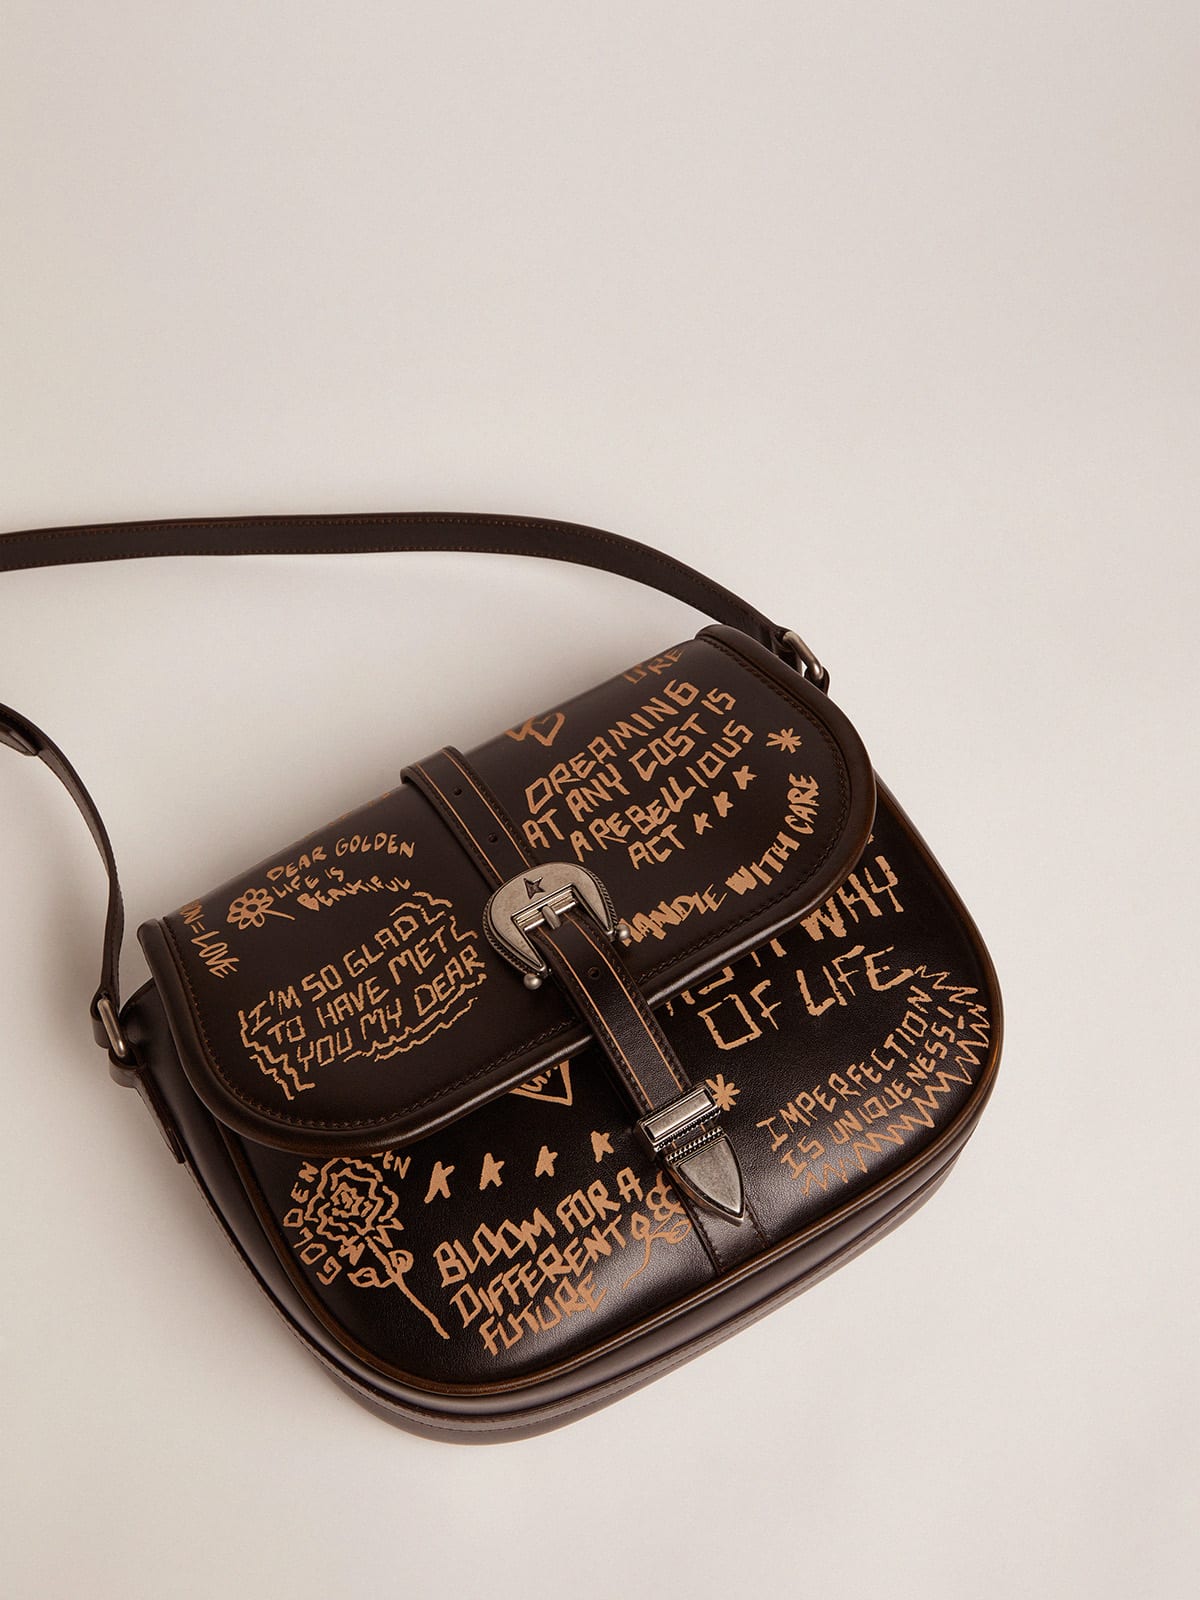 Golden Goose - Medium Rodeo Bag in black leather with contrasting lettering in 